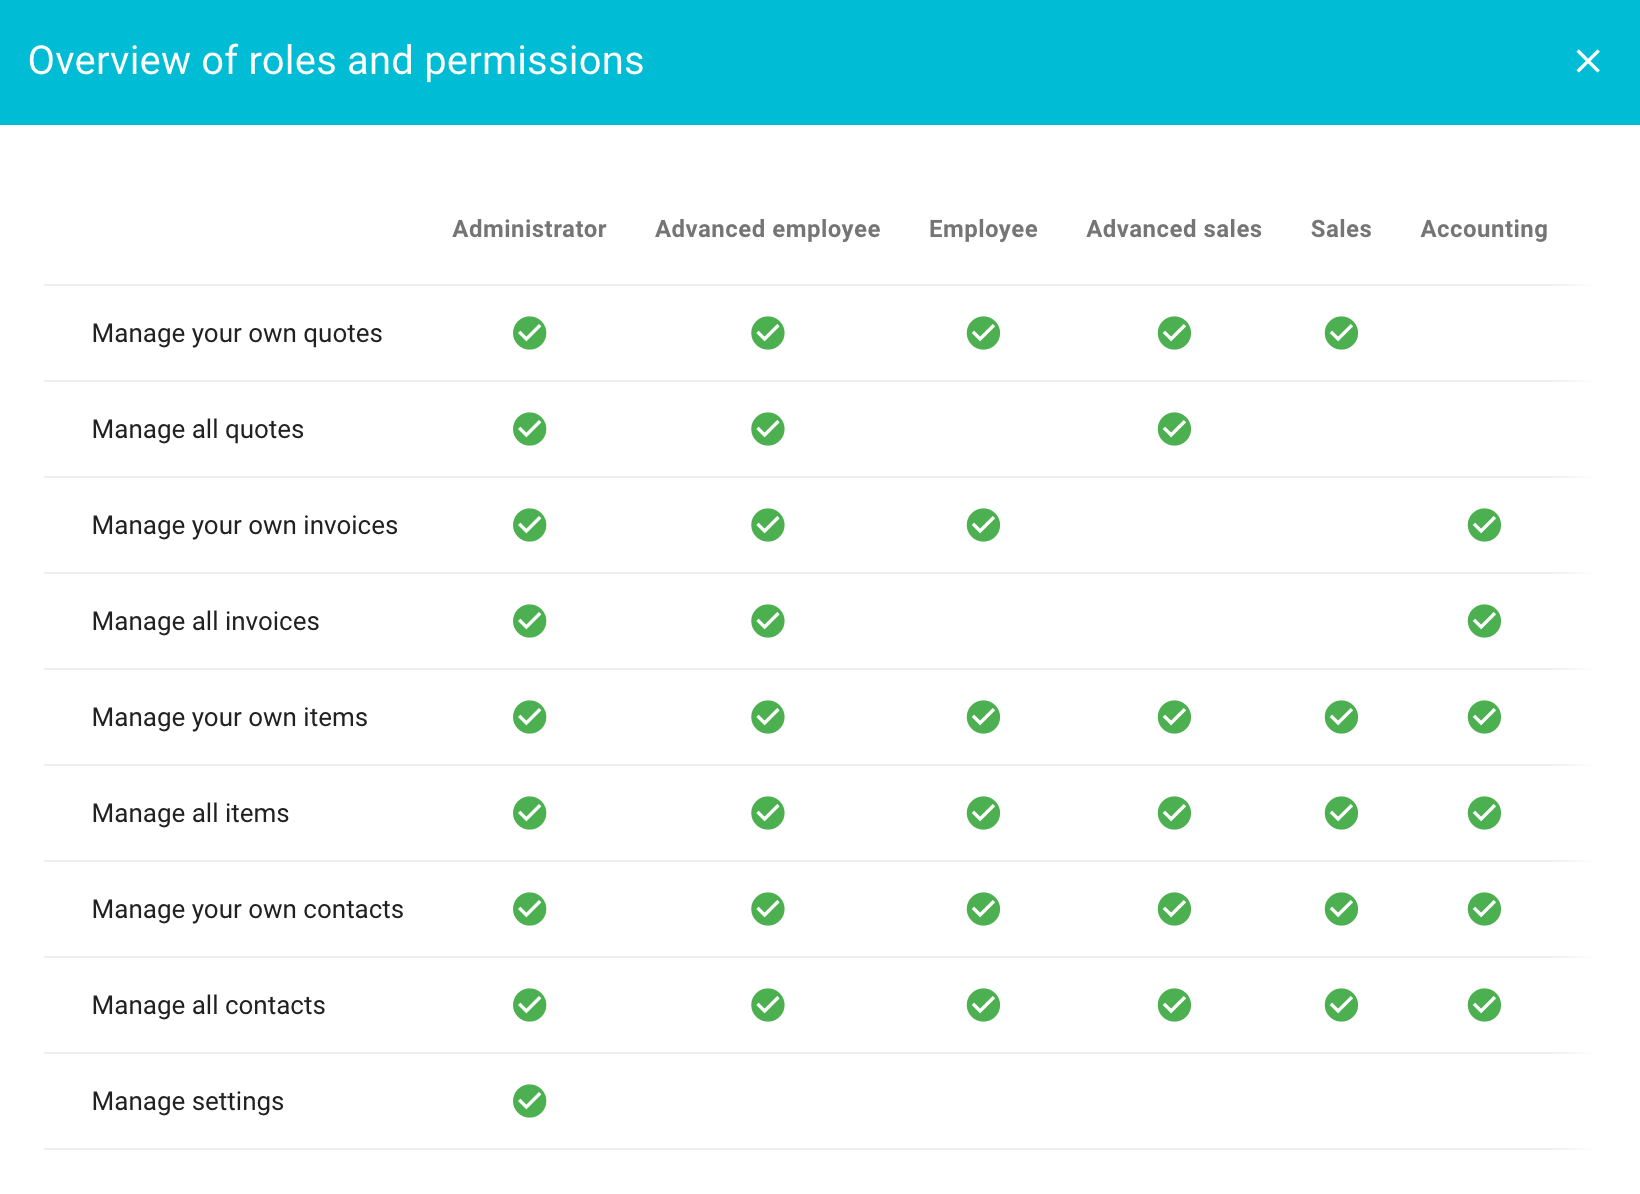 Overview of roles and permissions